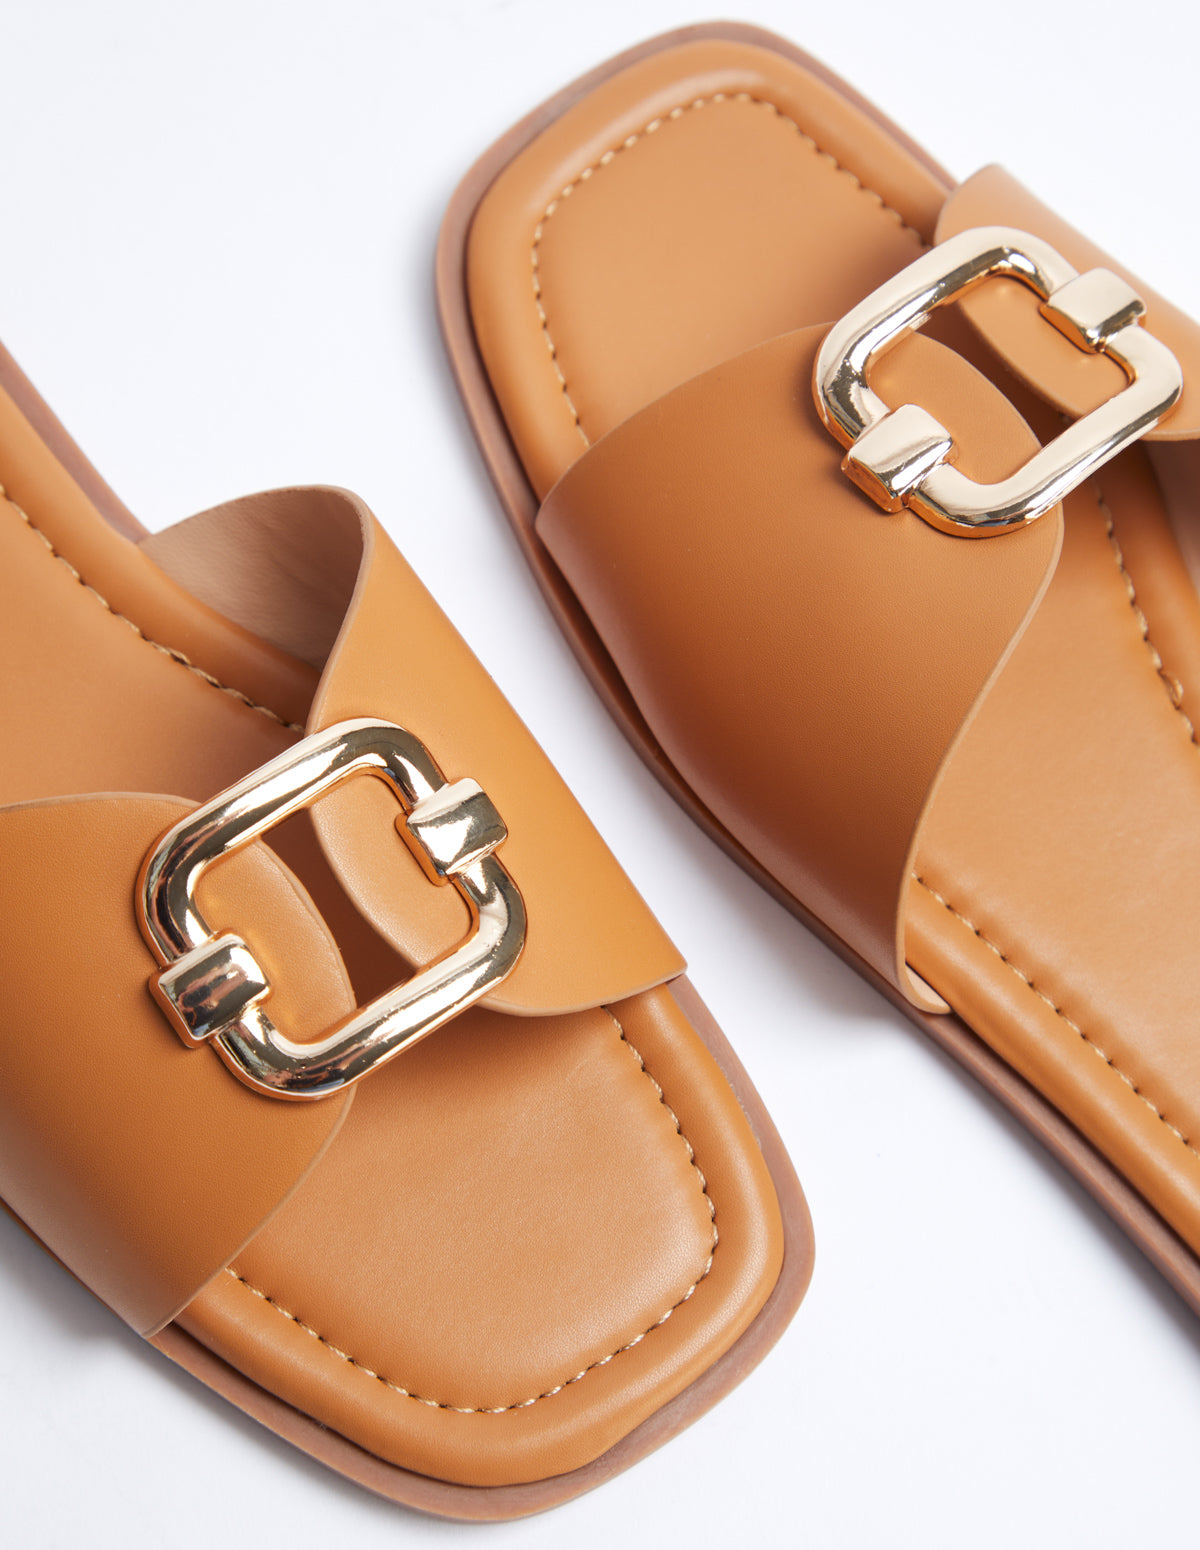 Buckle Sandals - May